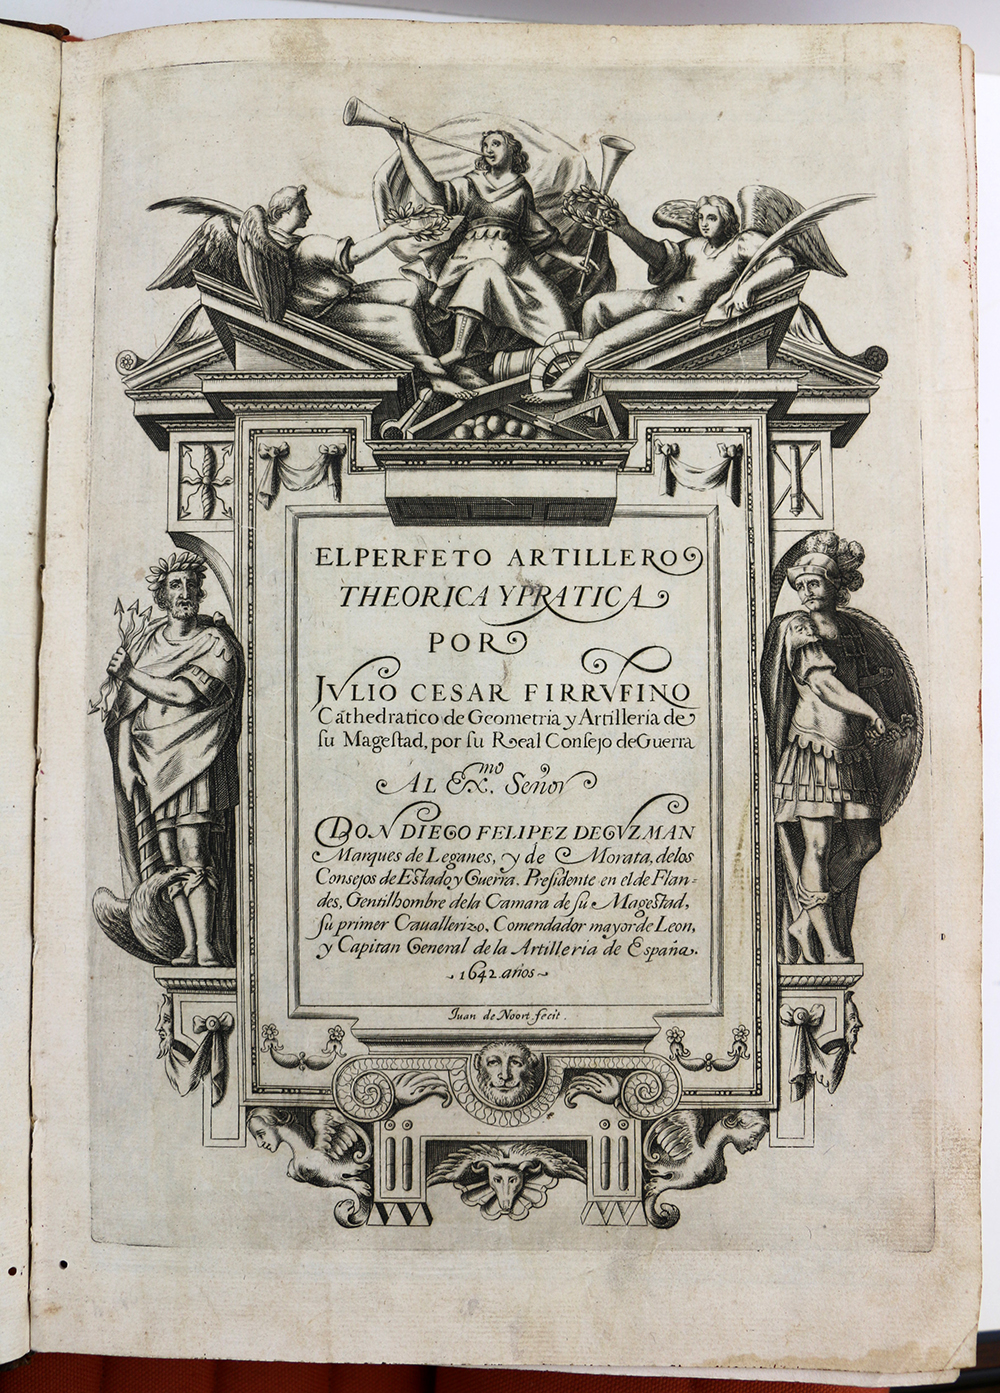 The title page of the book